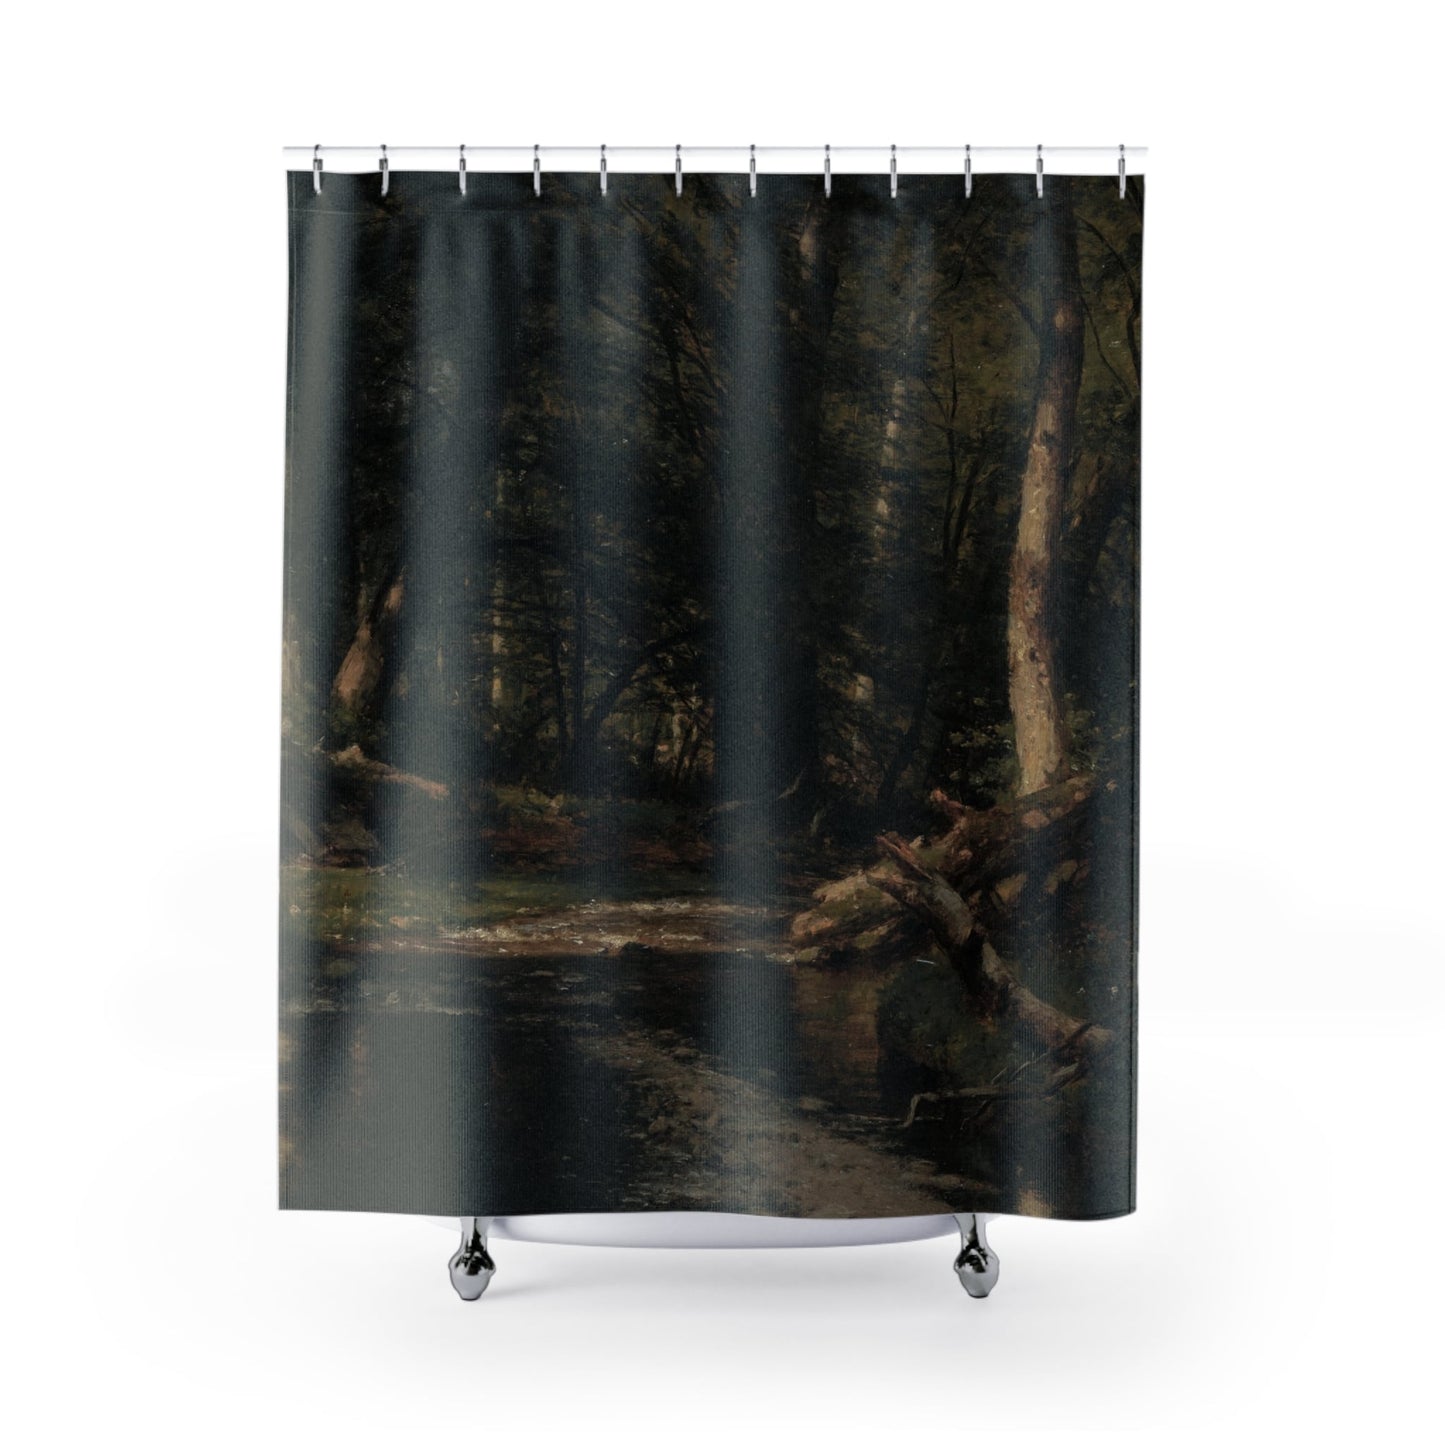 Dark Forest Shower Curtain with dark nature design, mysterious bathroom decor featuring moody forest landscapes.